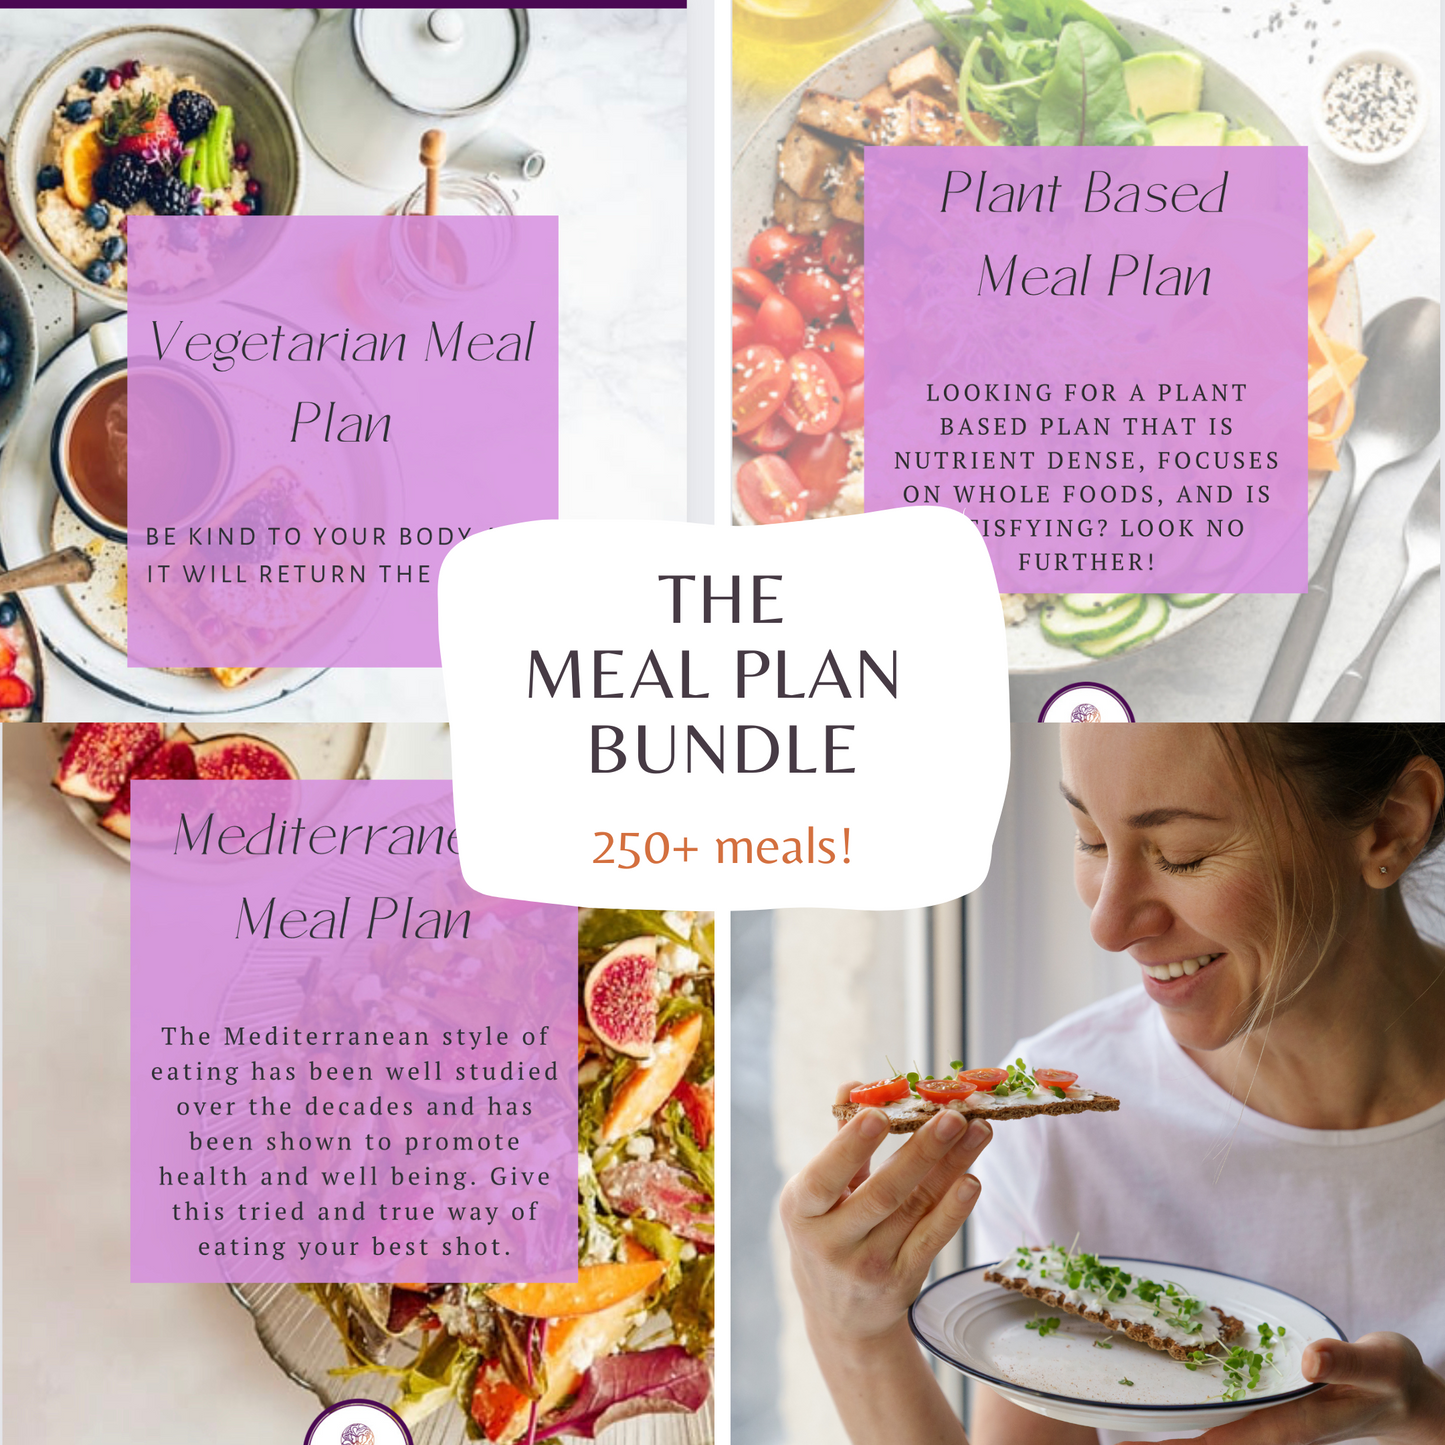 Ultimate Meal Bundle (250+ meals) Introductory Price